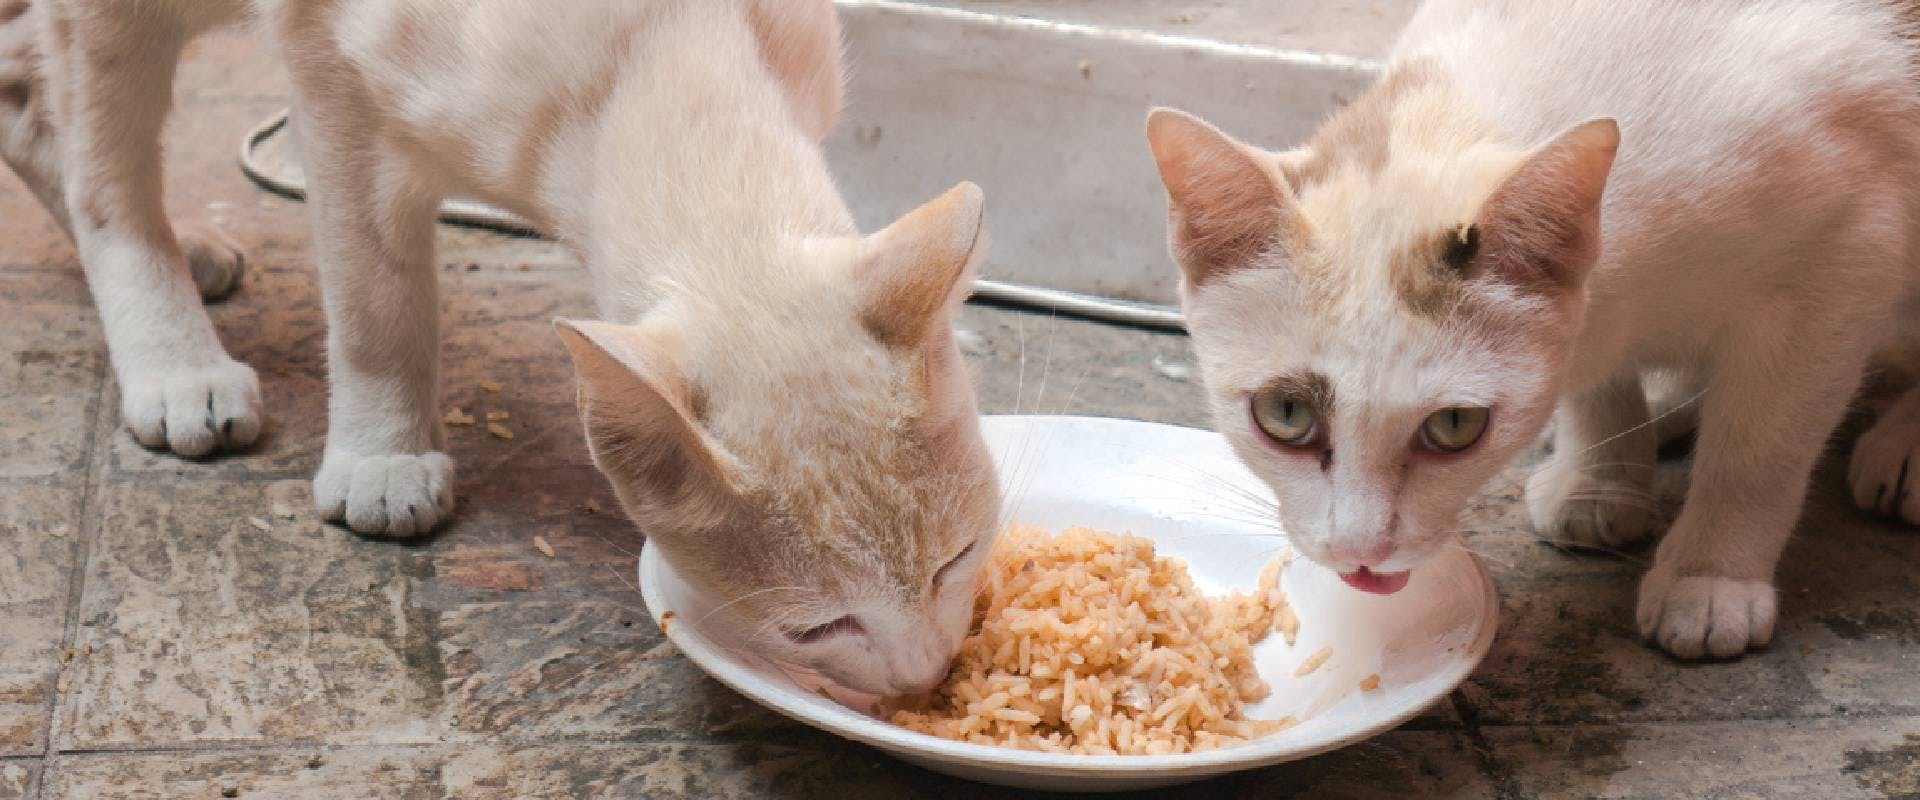 Two cats eating rice